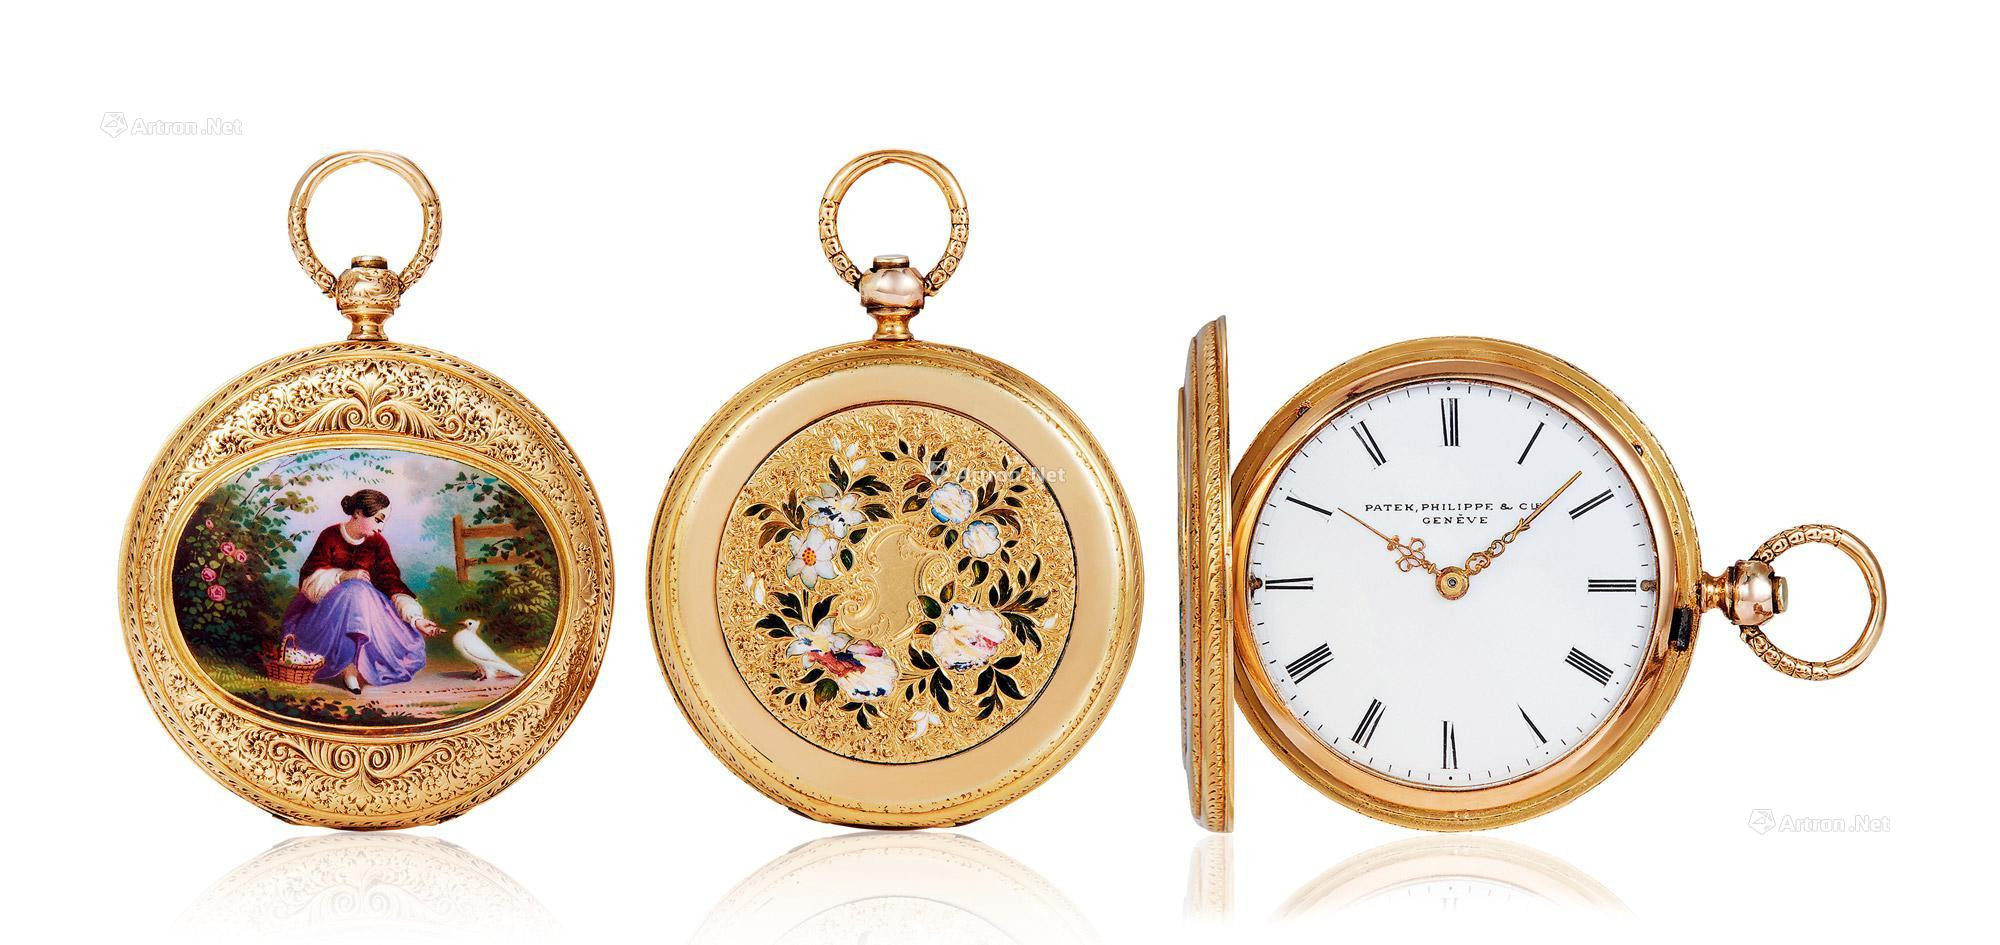 PATEK PHILIPPE A YELLOW GOLD MANUALLY-WOUND POCKET WATCH WITH ENAMEL CASE OF BOTH SIDES